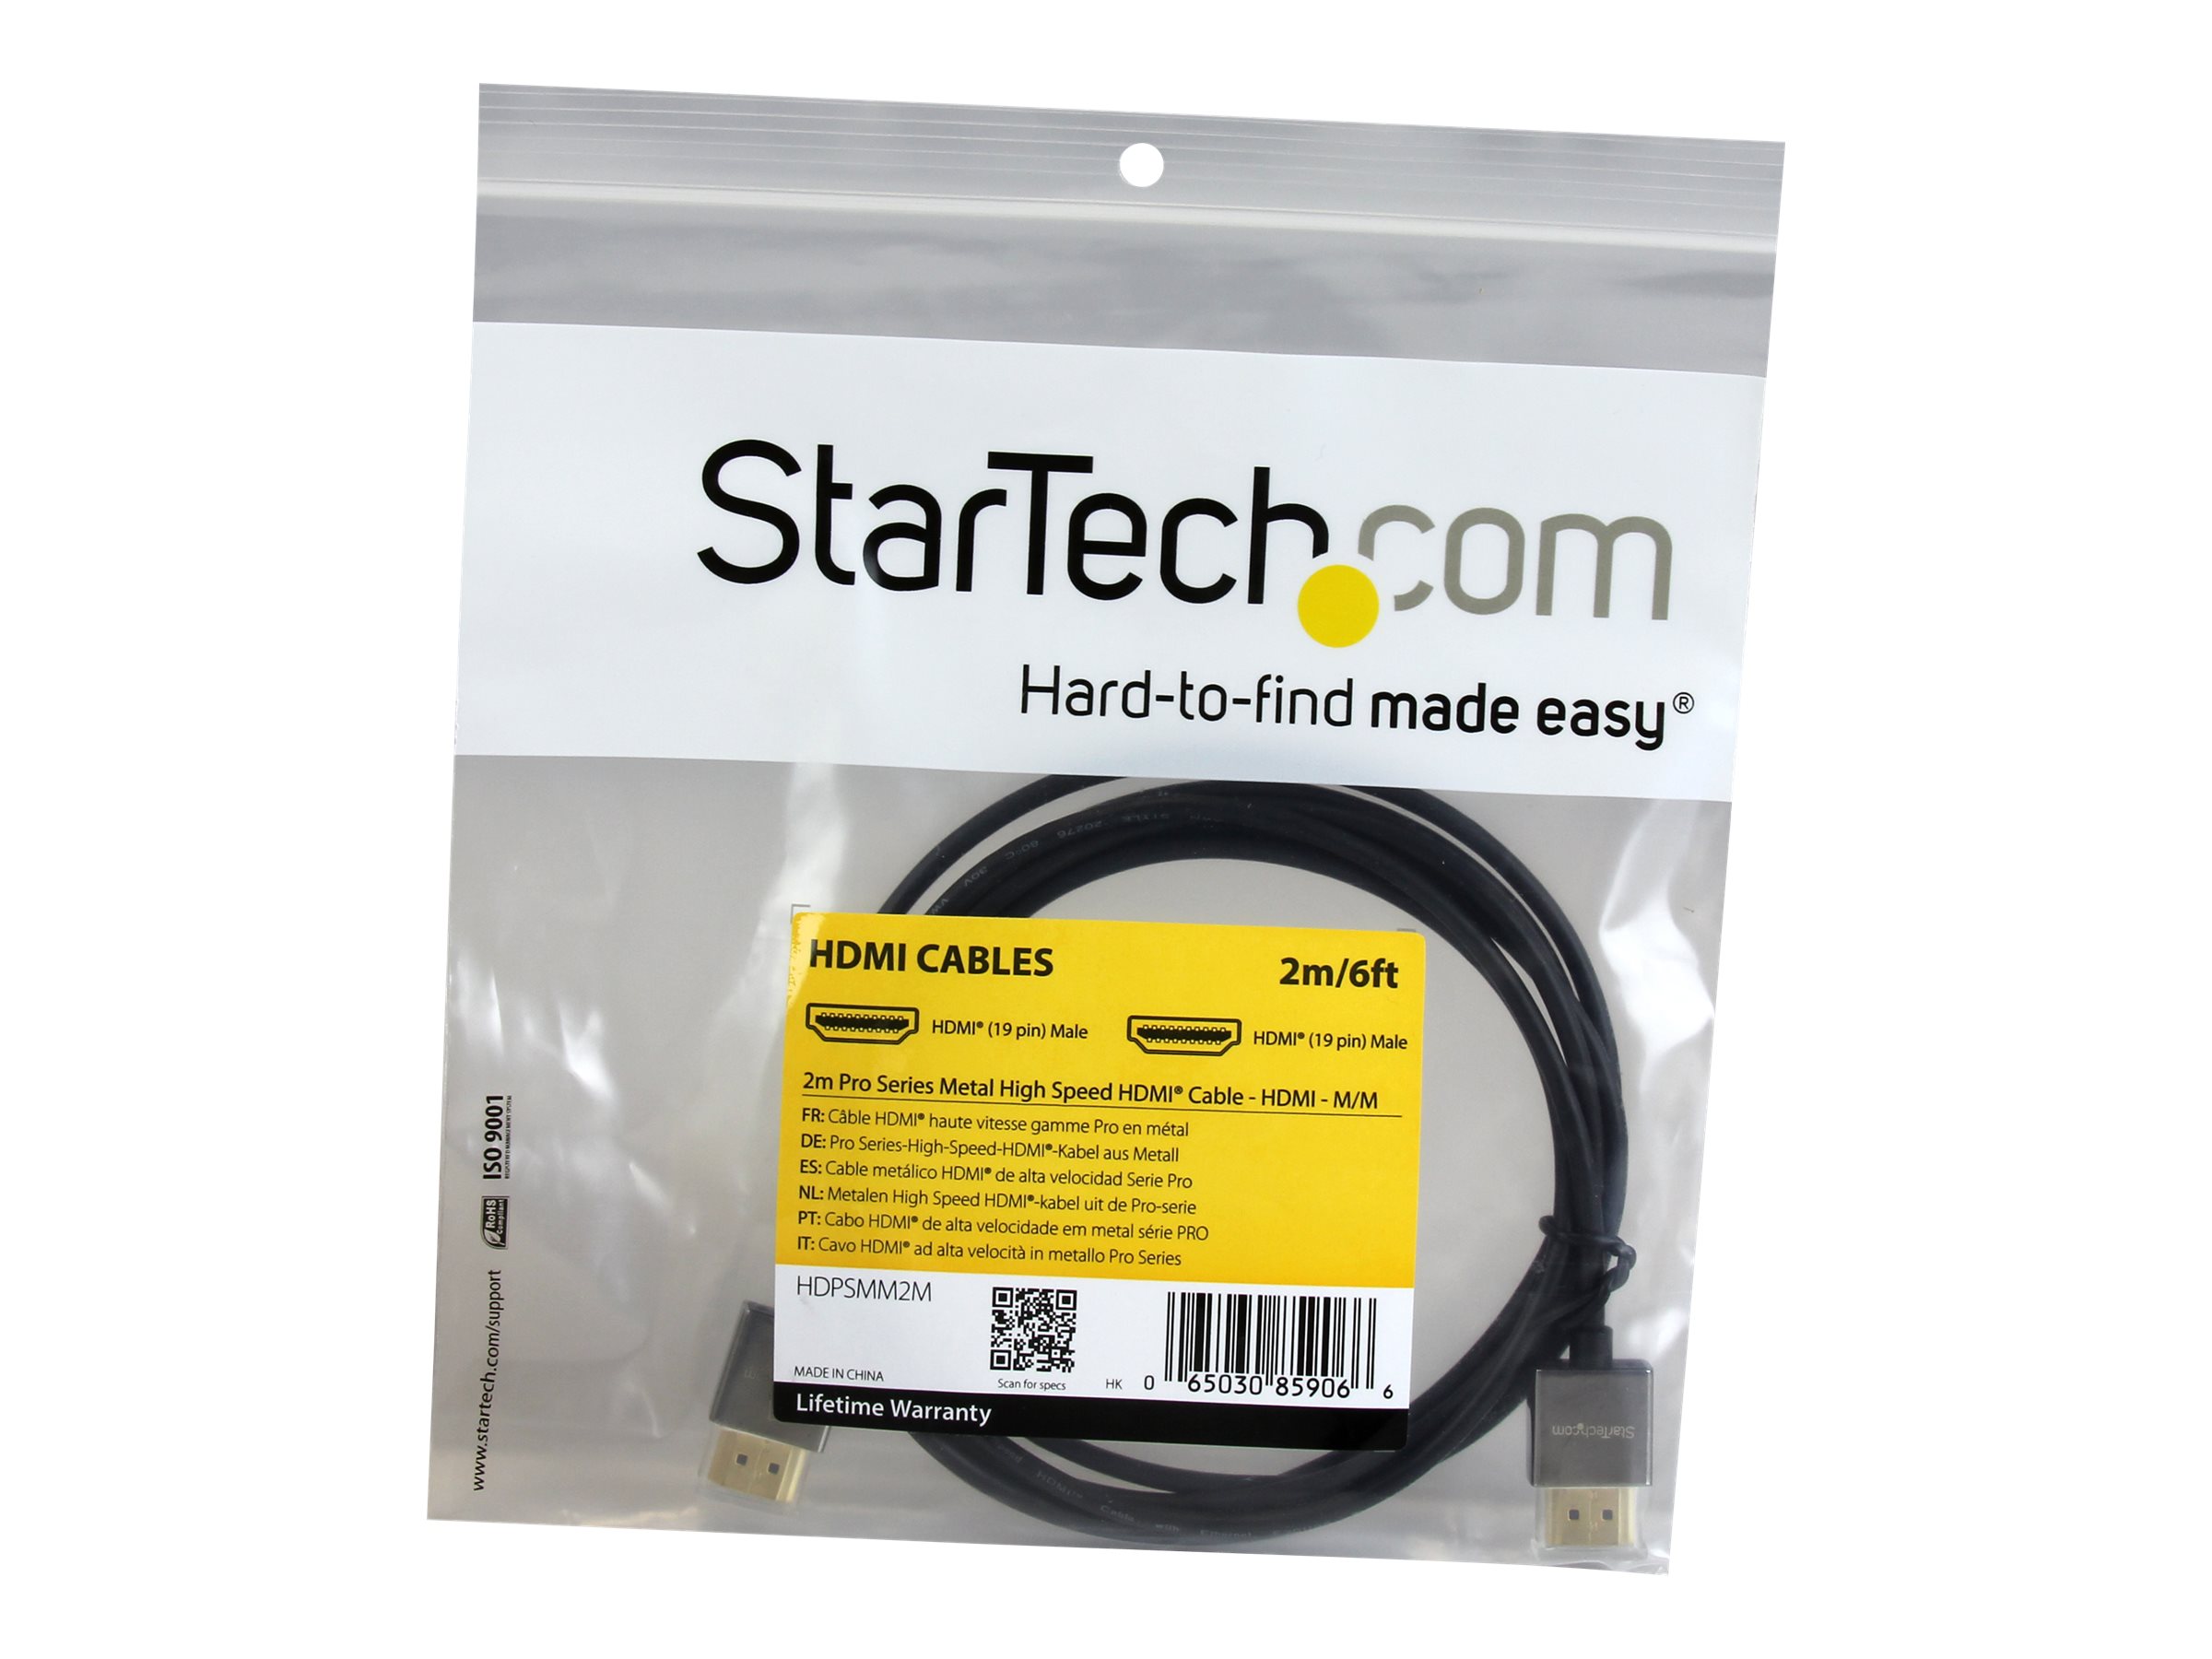 StarTech HDPSMM2M 6.56' HDMI 4K Audio/Video Cable Black - image 2 of 3